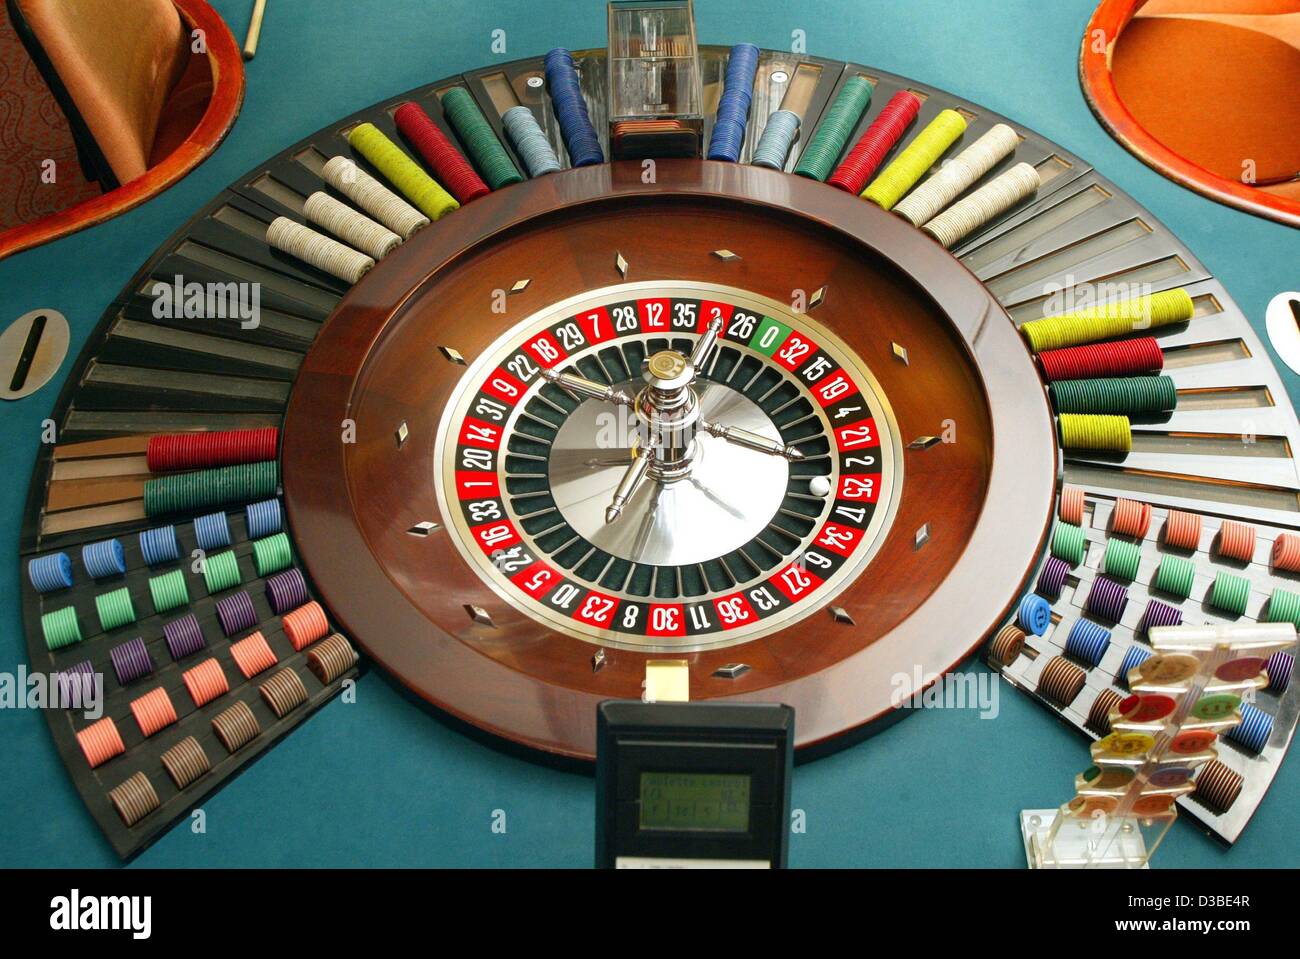 (dpa) - A view of a roulette wheel in the casino in Hamburg, 16 January 2003. Hamburg's casino celebrates its 25th anniversary this year. In Germany, 90 percent of the profits have to be paid to the senate. Thus, the state of Hamburg in the past 25 years gained 800 million Euro. In 2002 the state ga Stock Photo